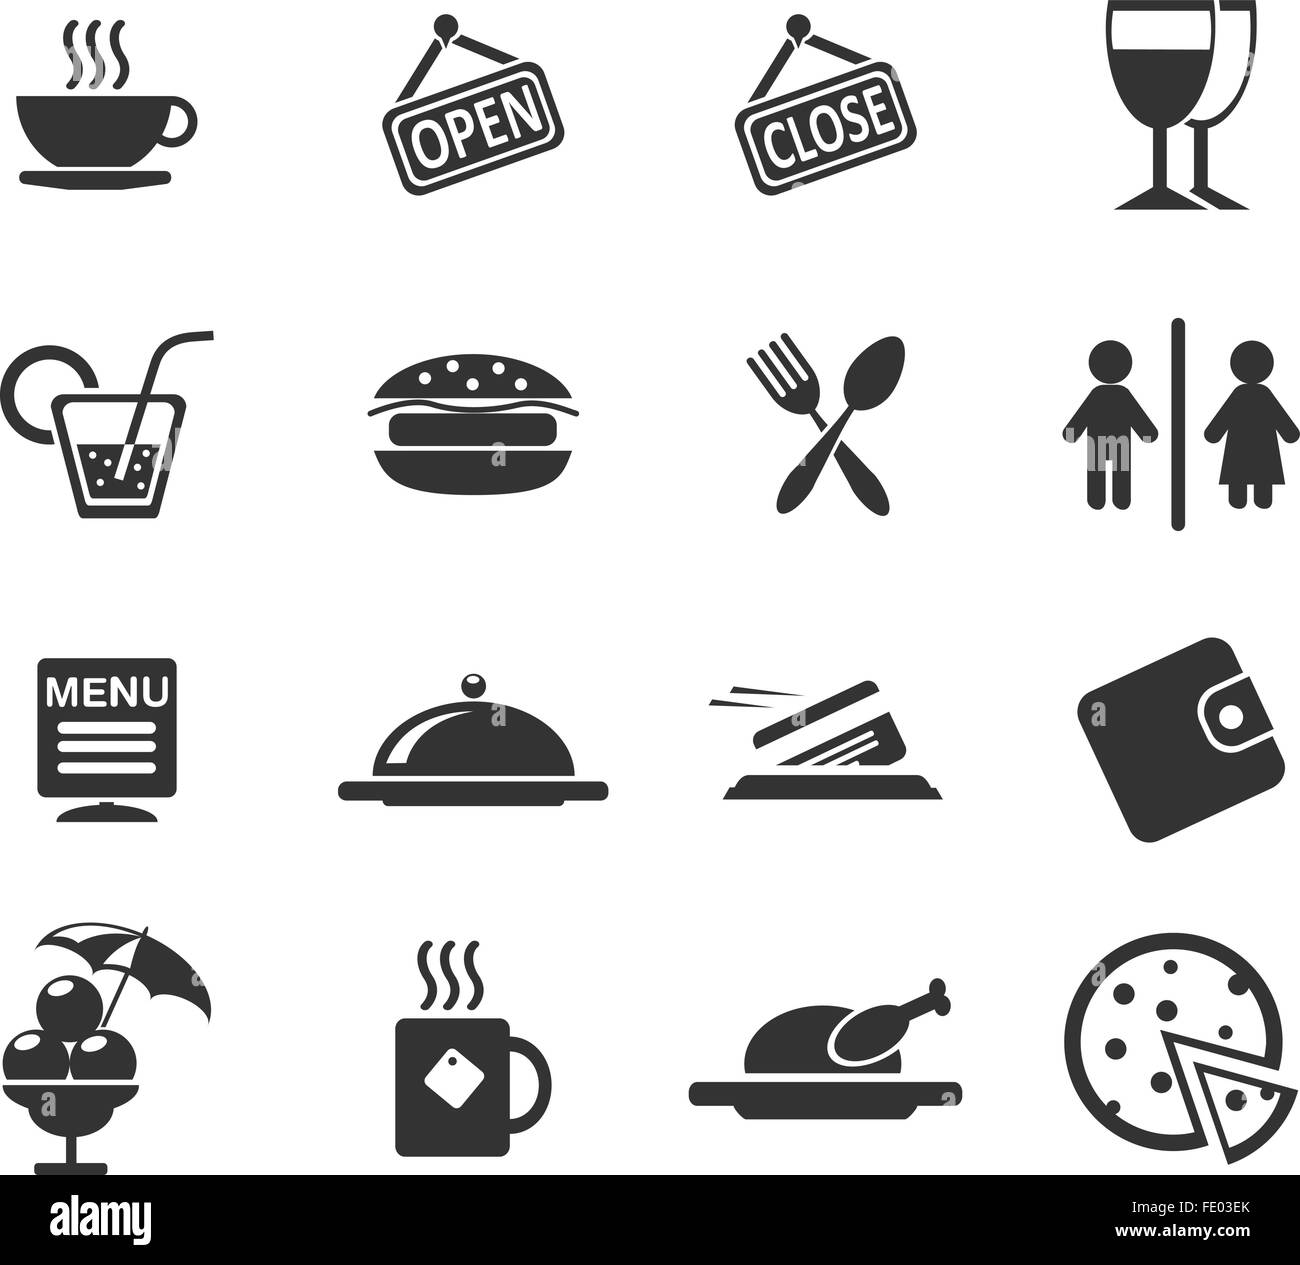 Cafe Silhouette Icons Stock Vector